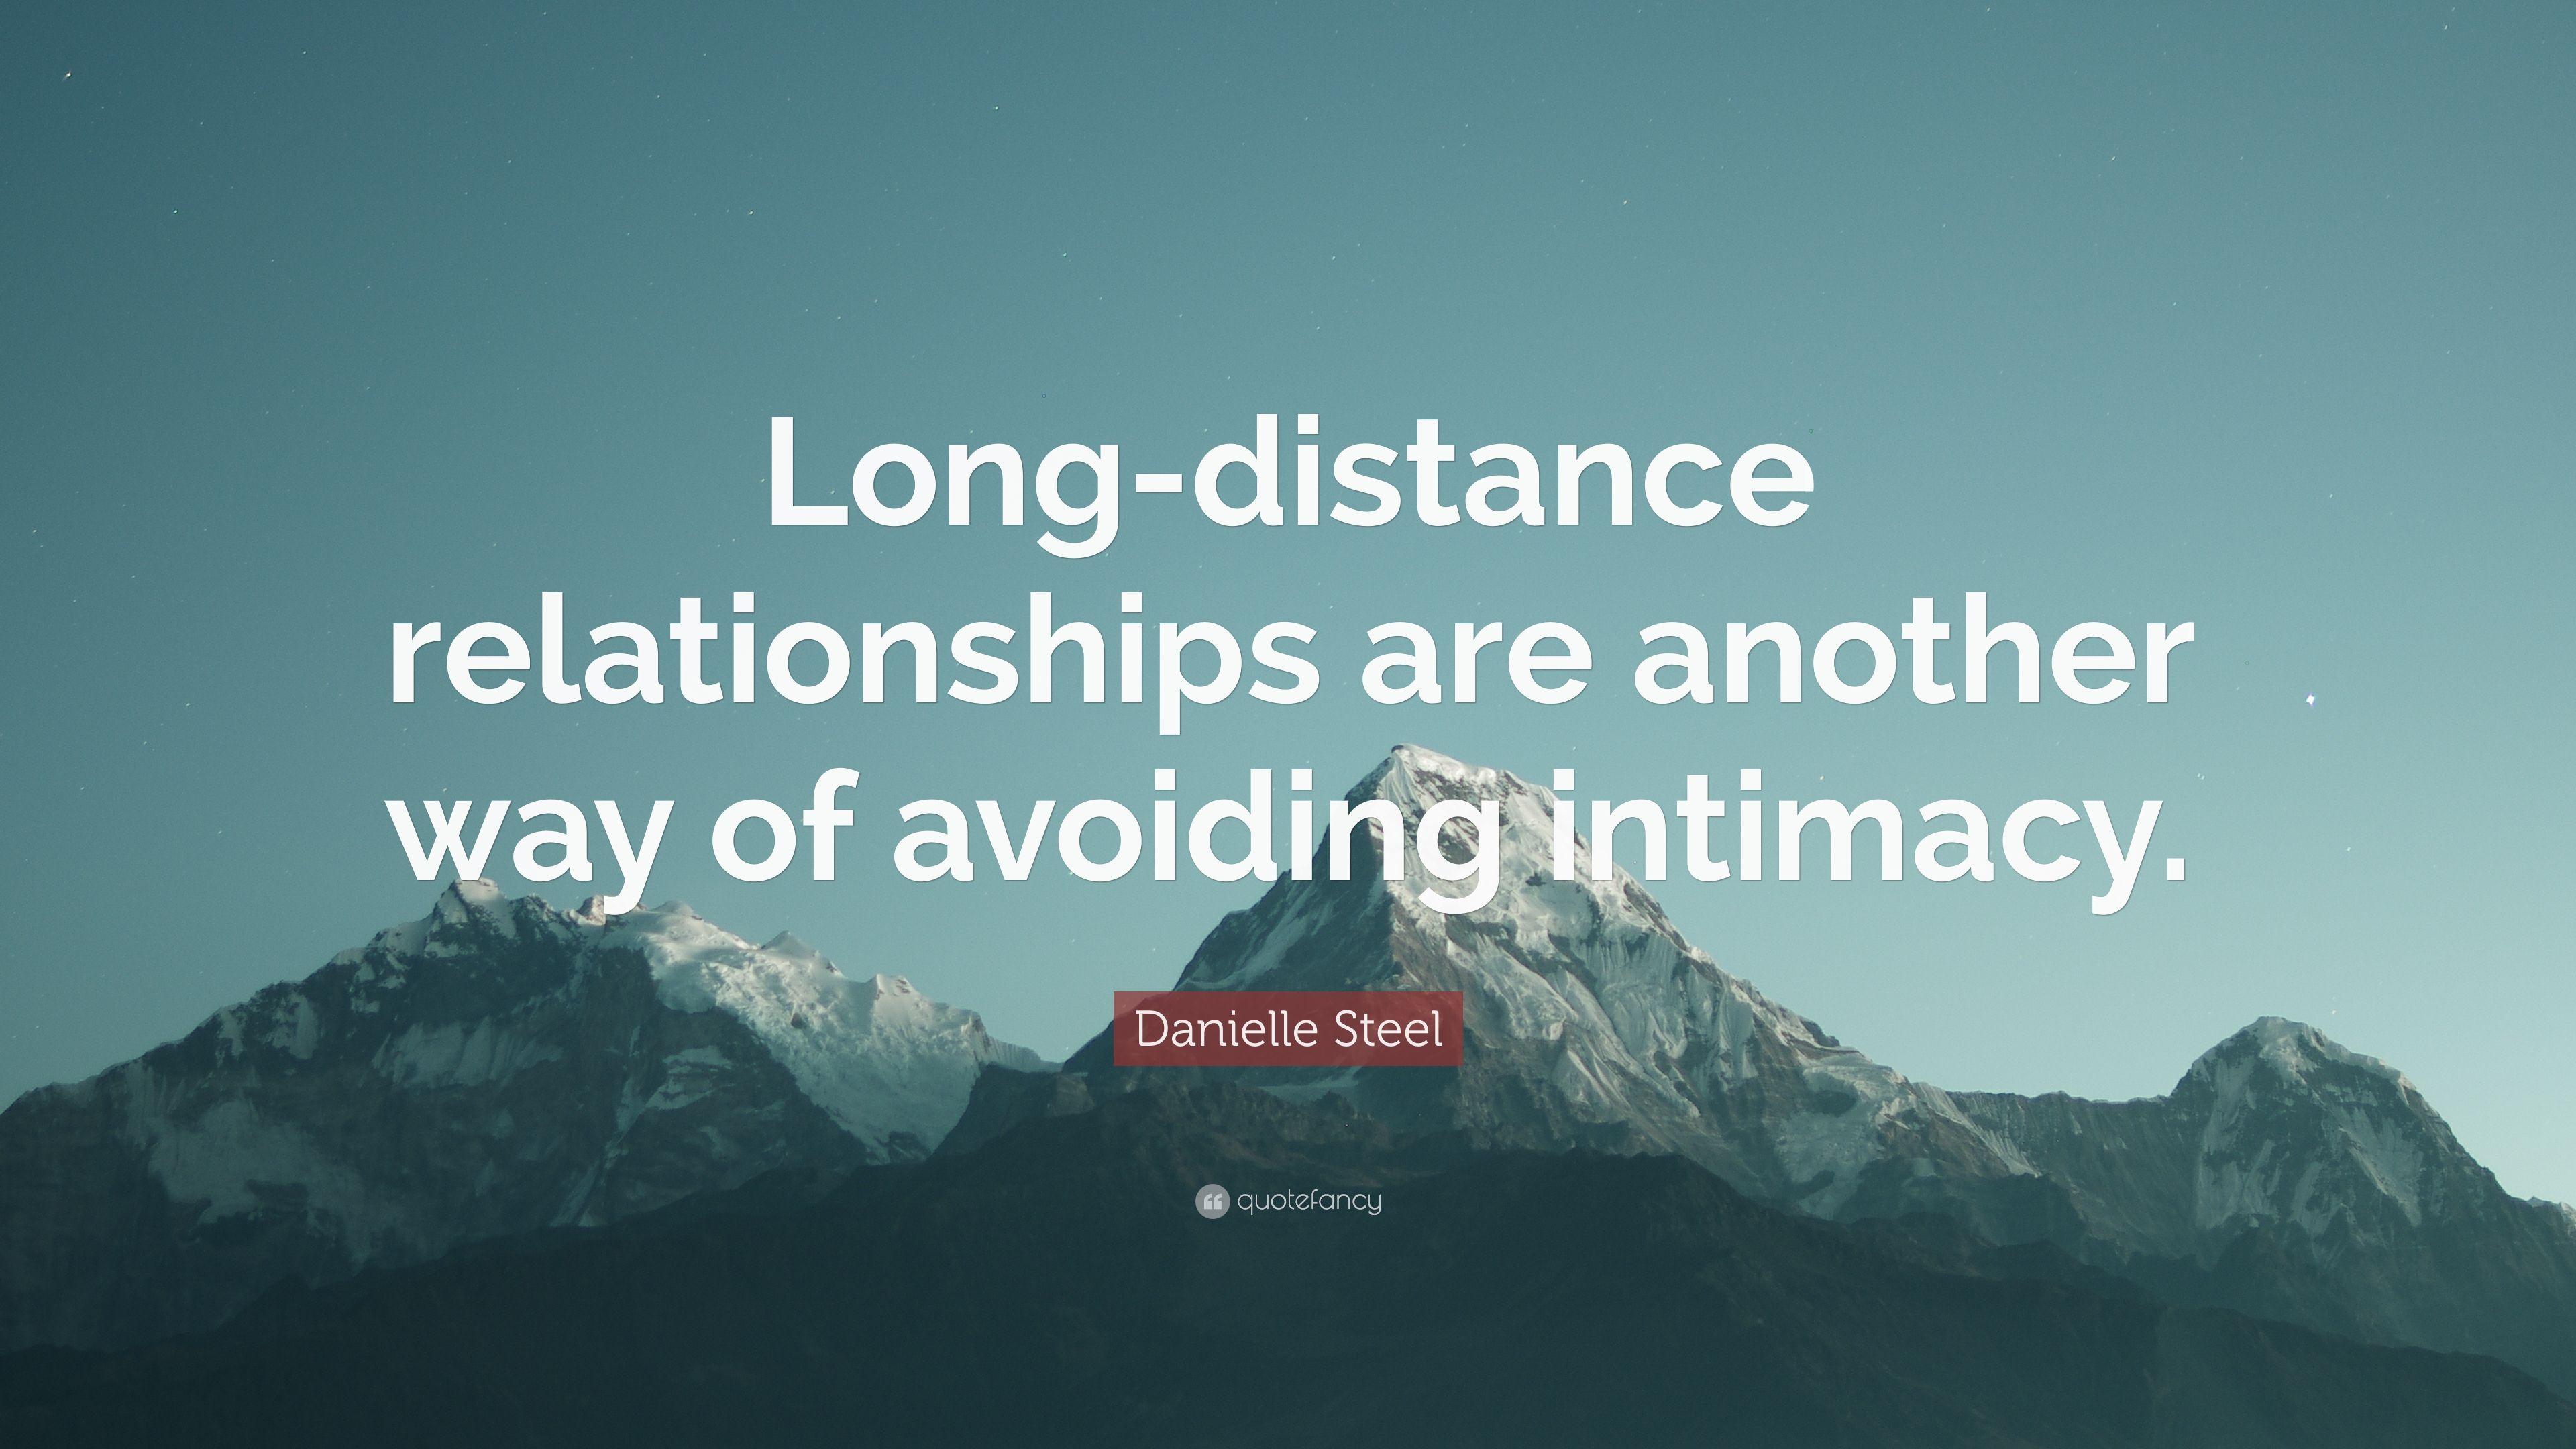 Danielle Steel Quote: “Long Distance Relationships Are